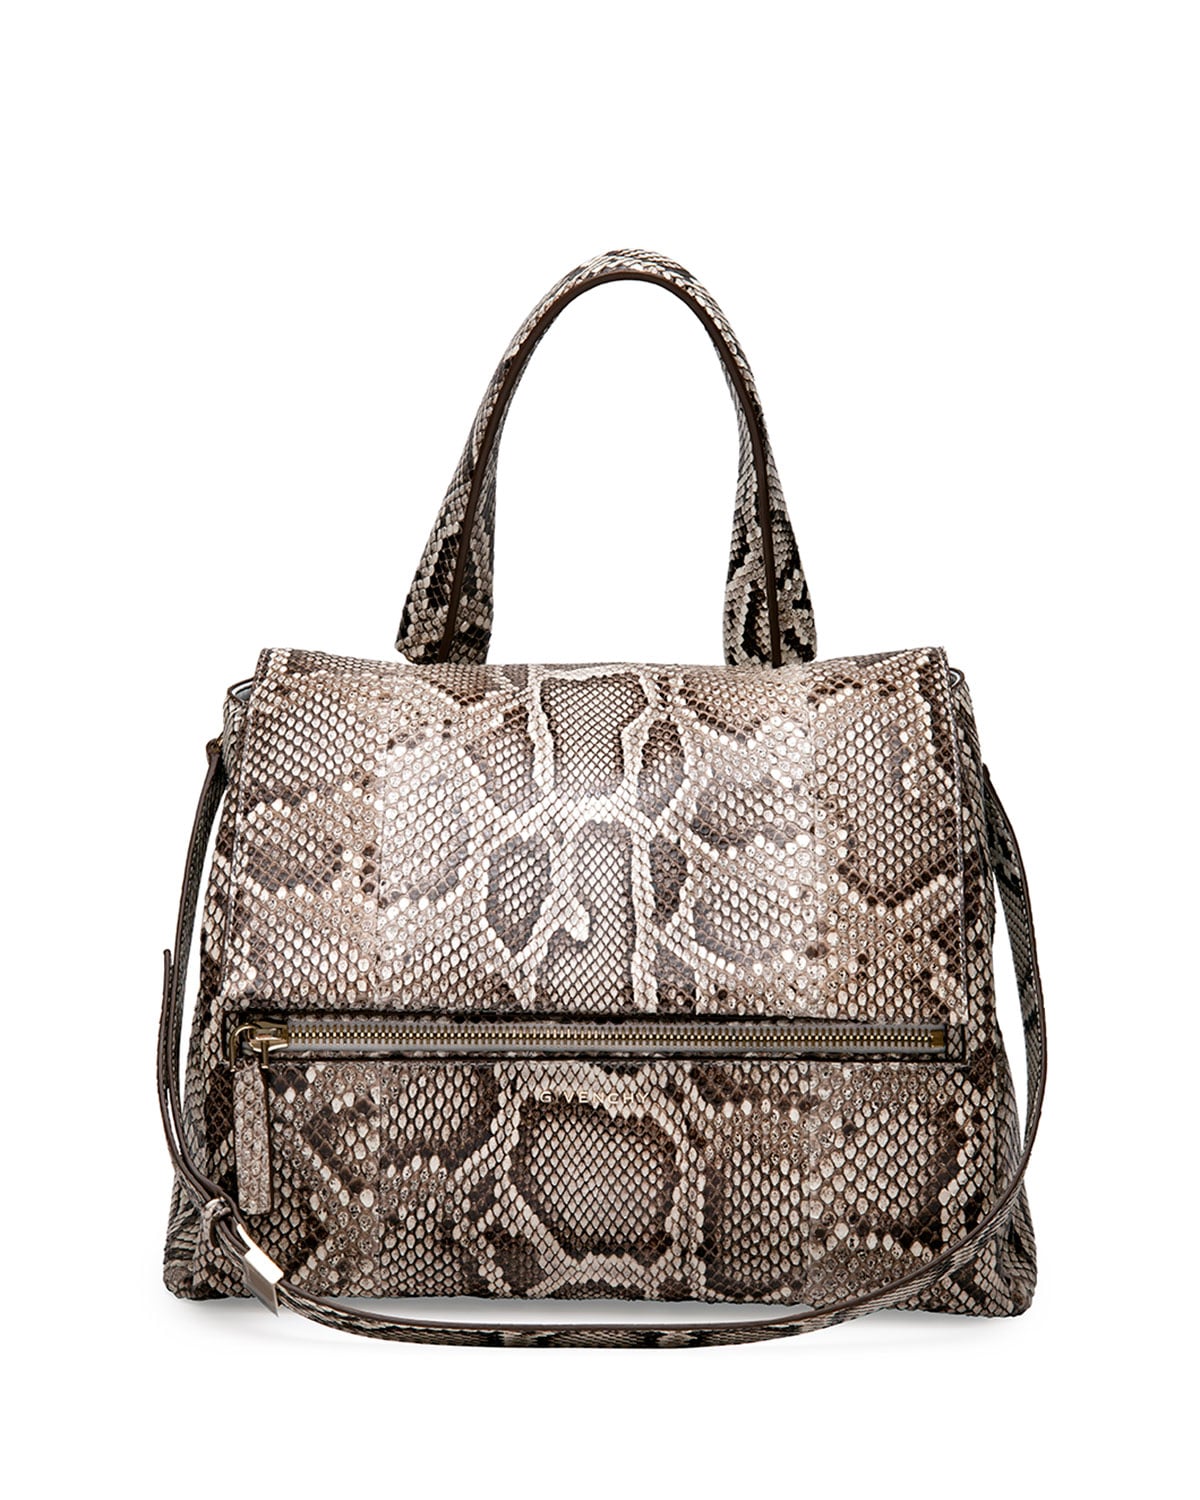 Givenchy Cruise 2015 Bag Collection with More Croc Embossed Styles ...